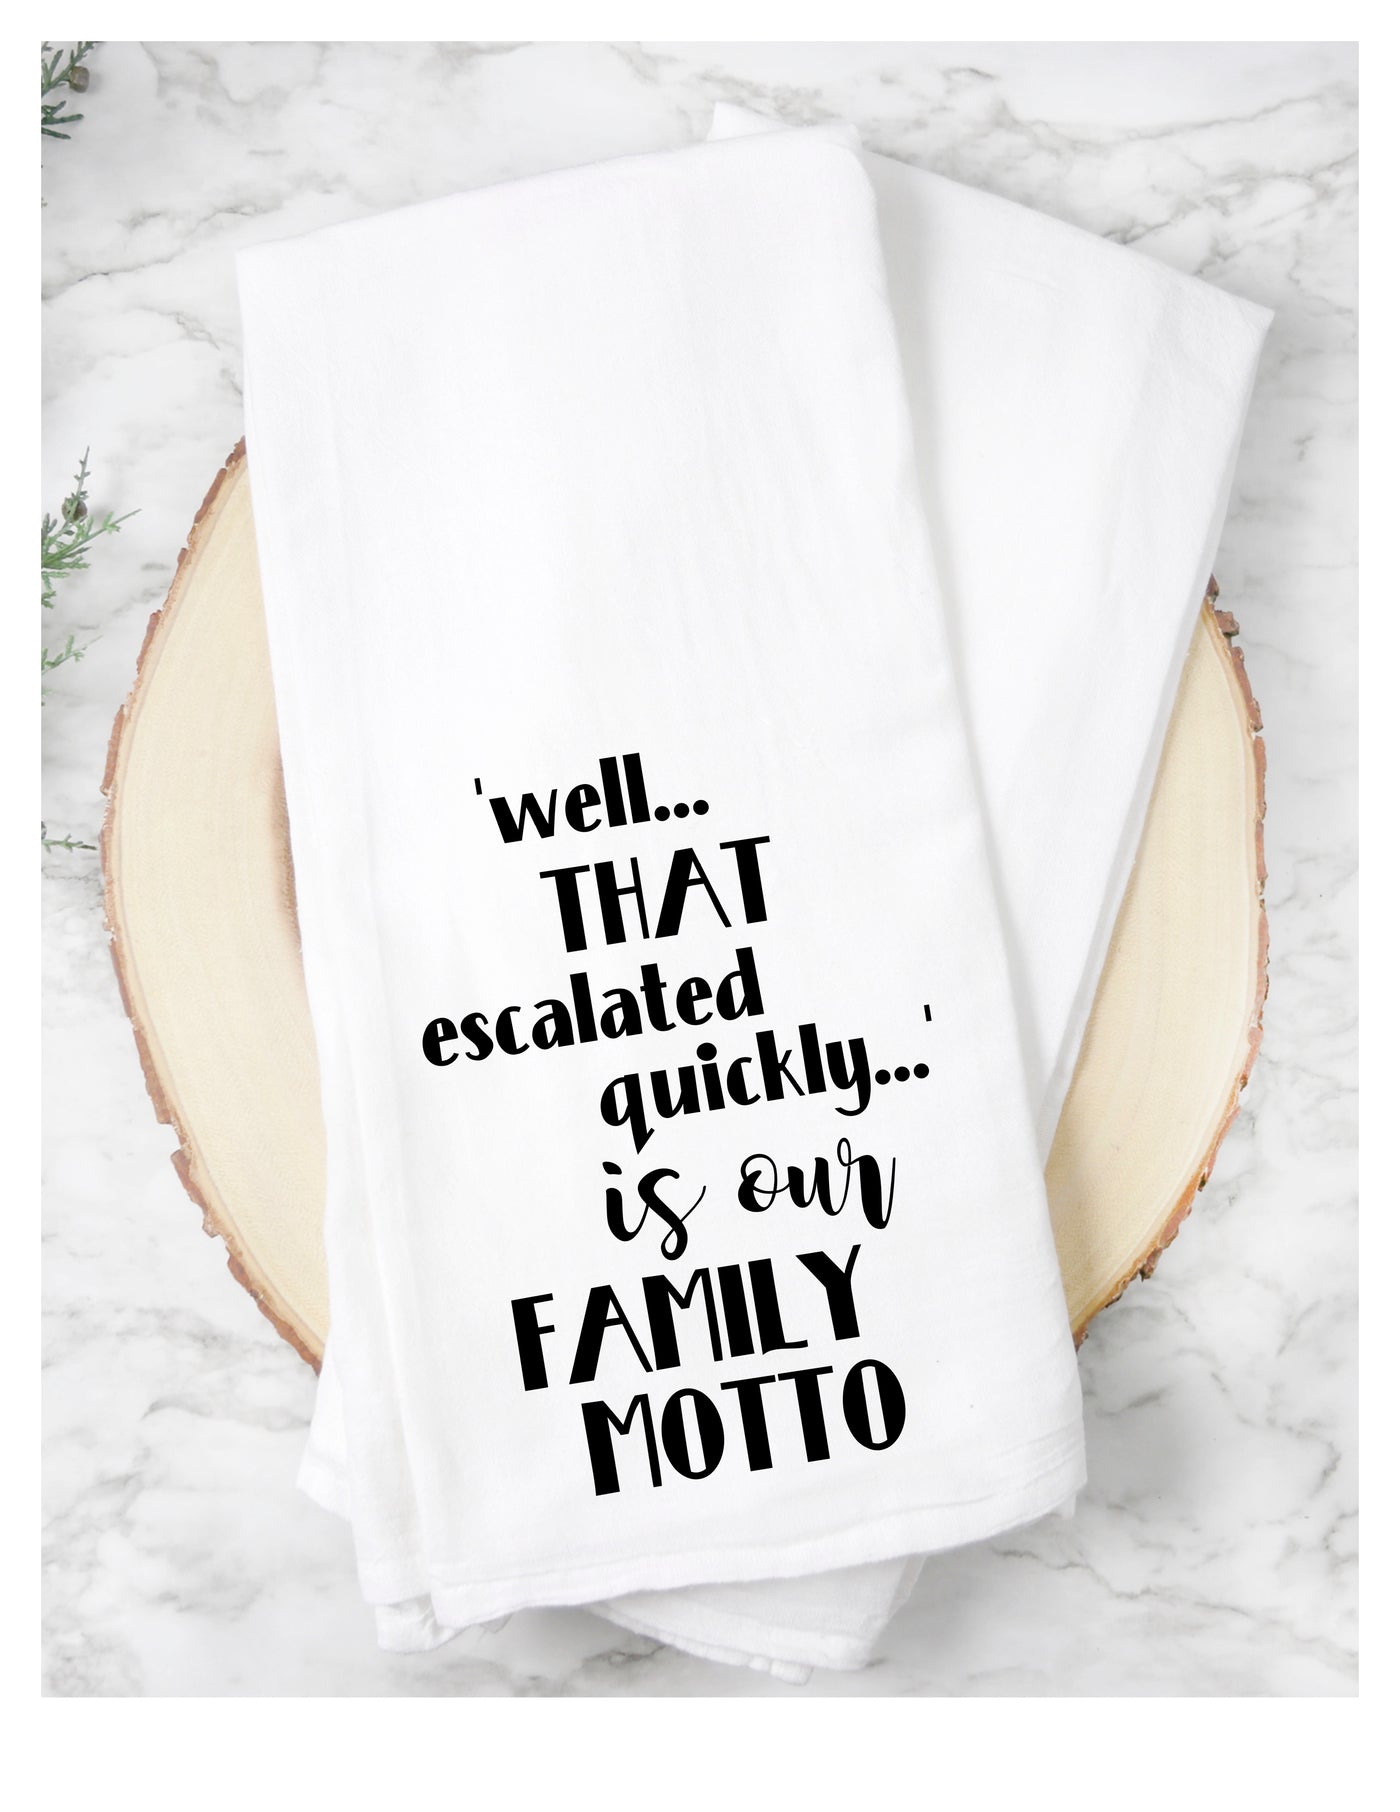 white cotton kitchen towel with the words, 'well..THAT escalated quickly...is our FAMILY MOTTO.'